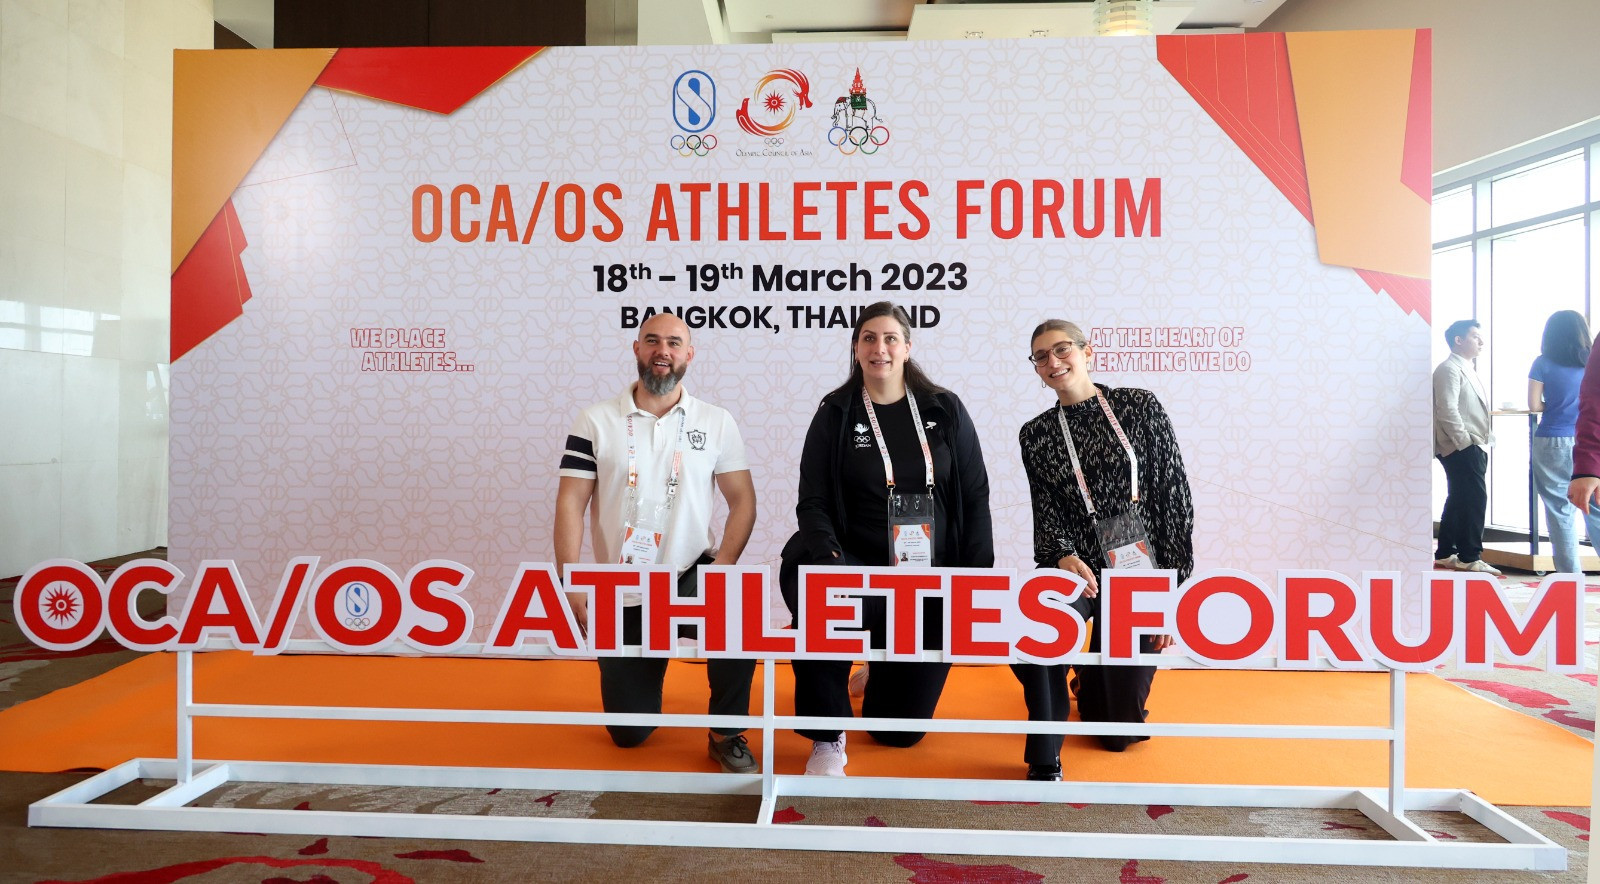 Jordan was among the 43 countries represented at the Athletes' Forum, including IOC Athletes' Commission member Nadin Dawani, centre ©OCA